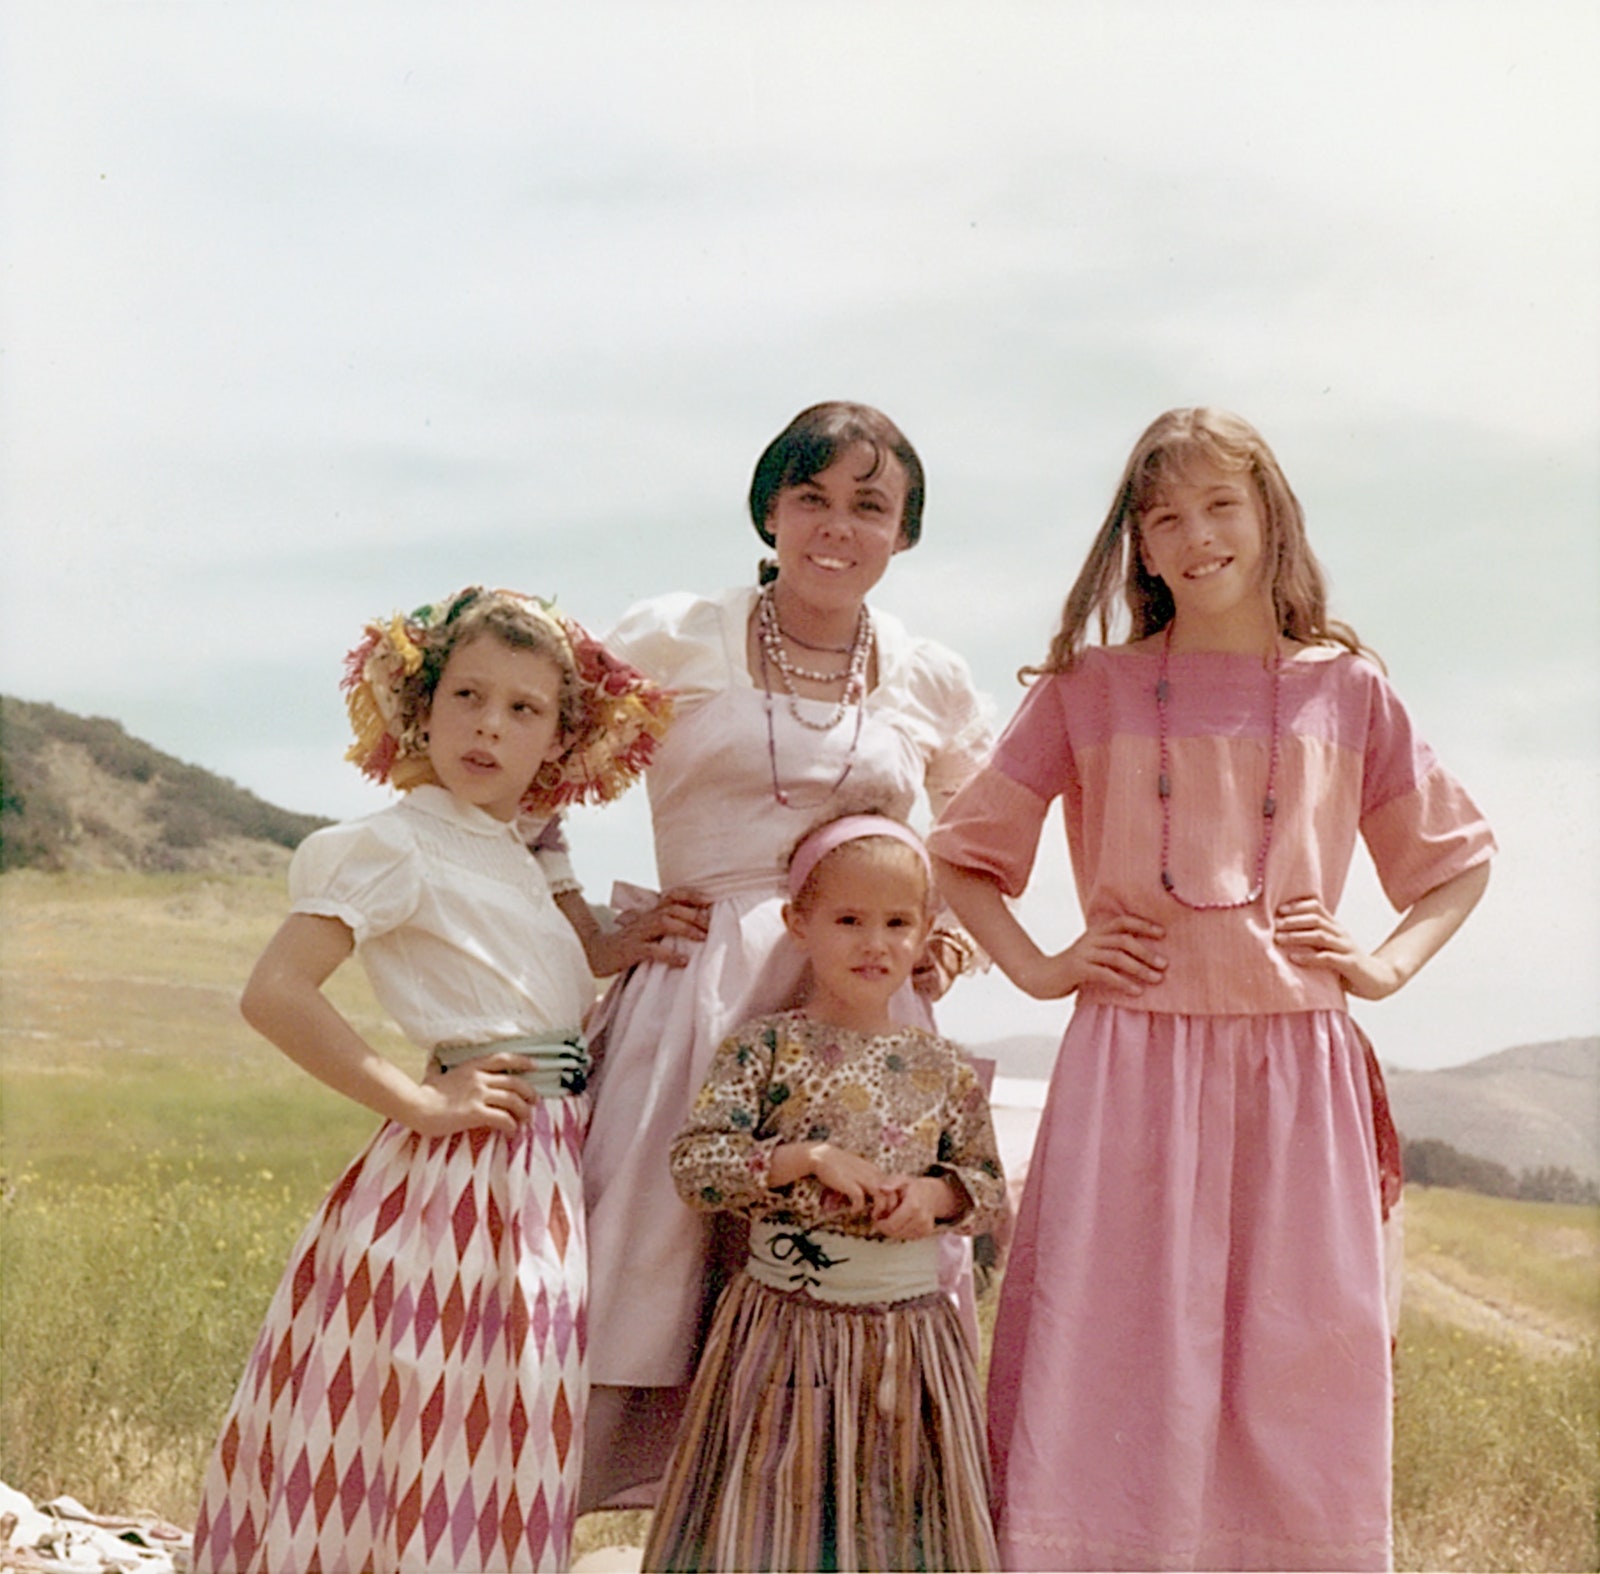 A photograph of a woman with three children standing in a meadow. They are wearing pink and white dresses and three have...